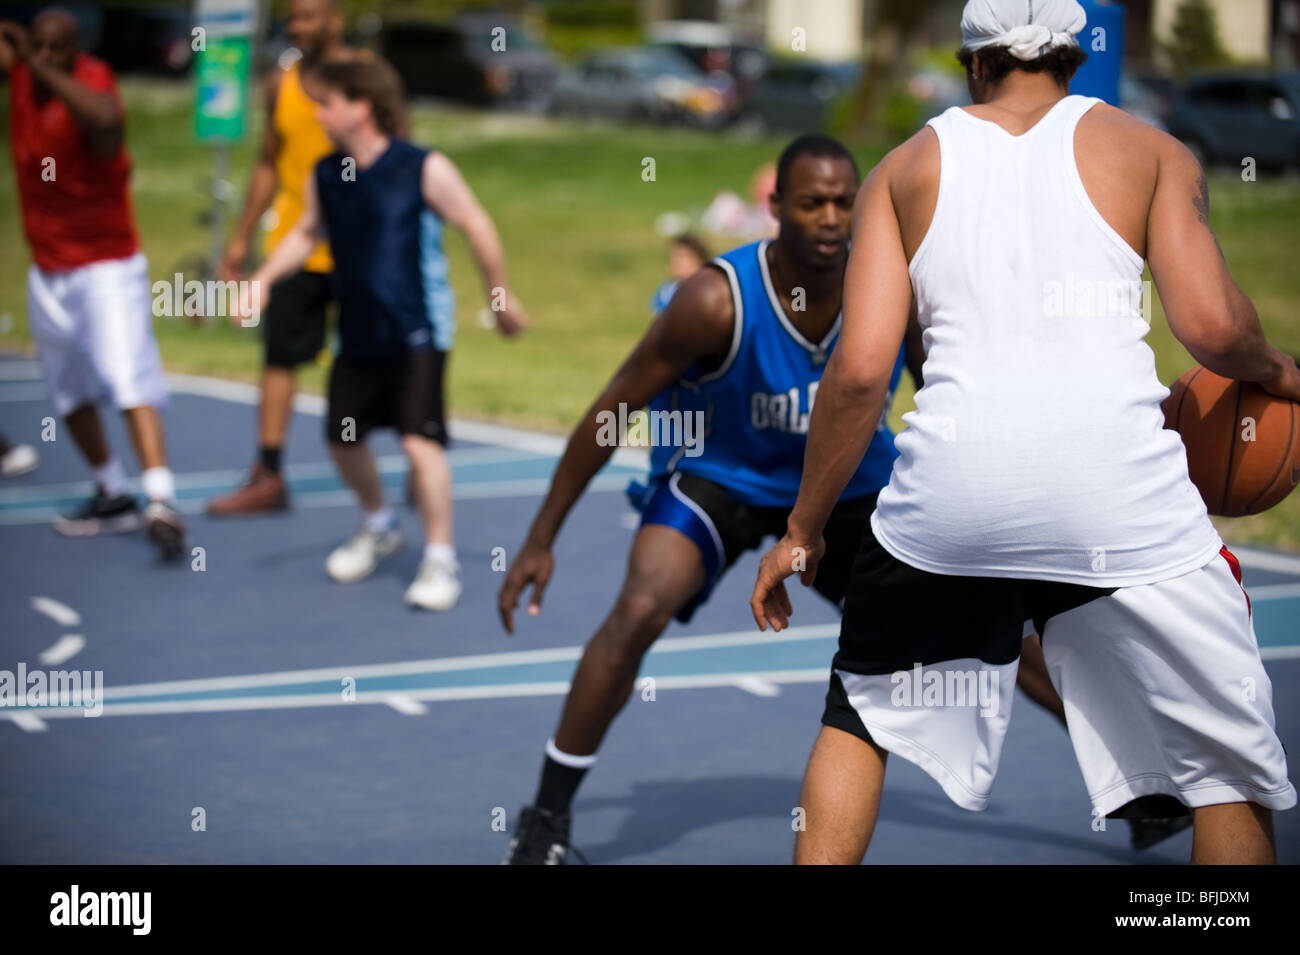 basketball players in an outdoor park in vancouver Stock Photo